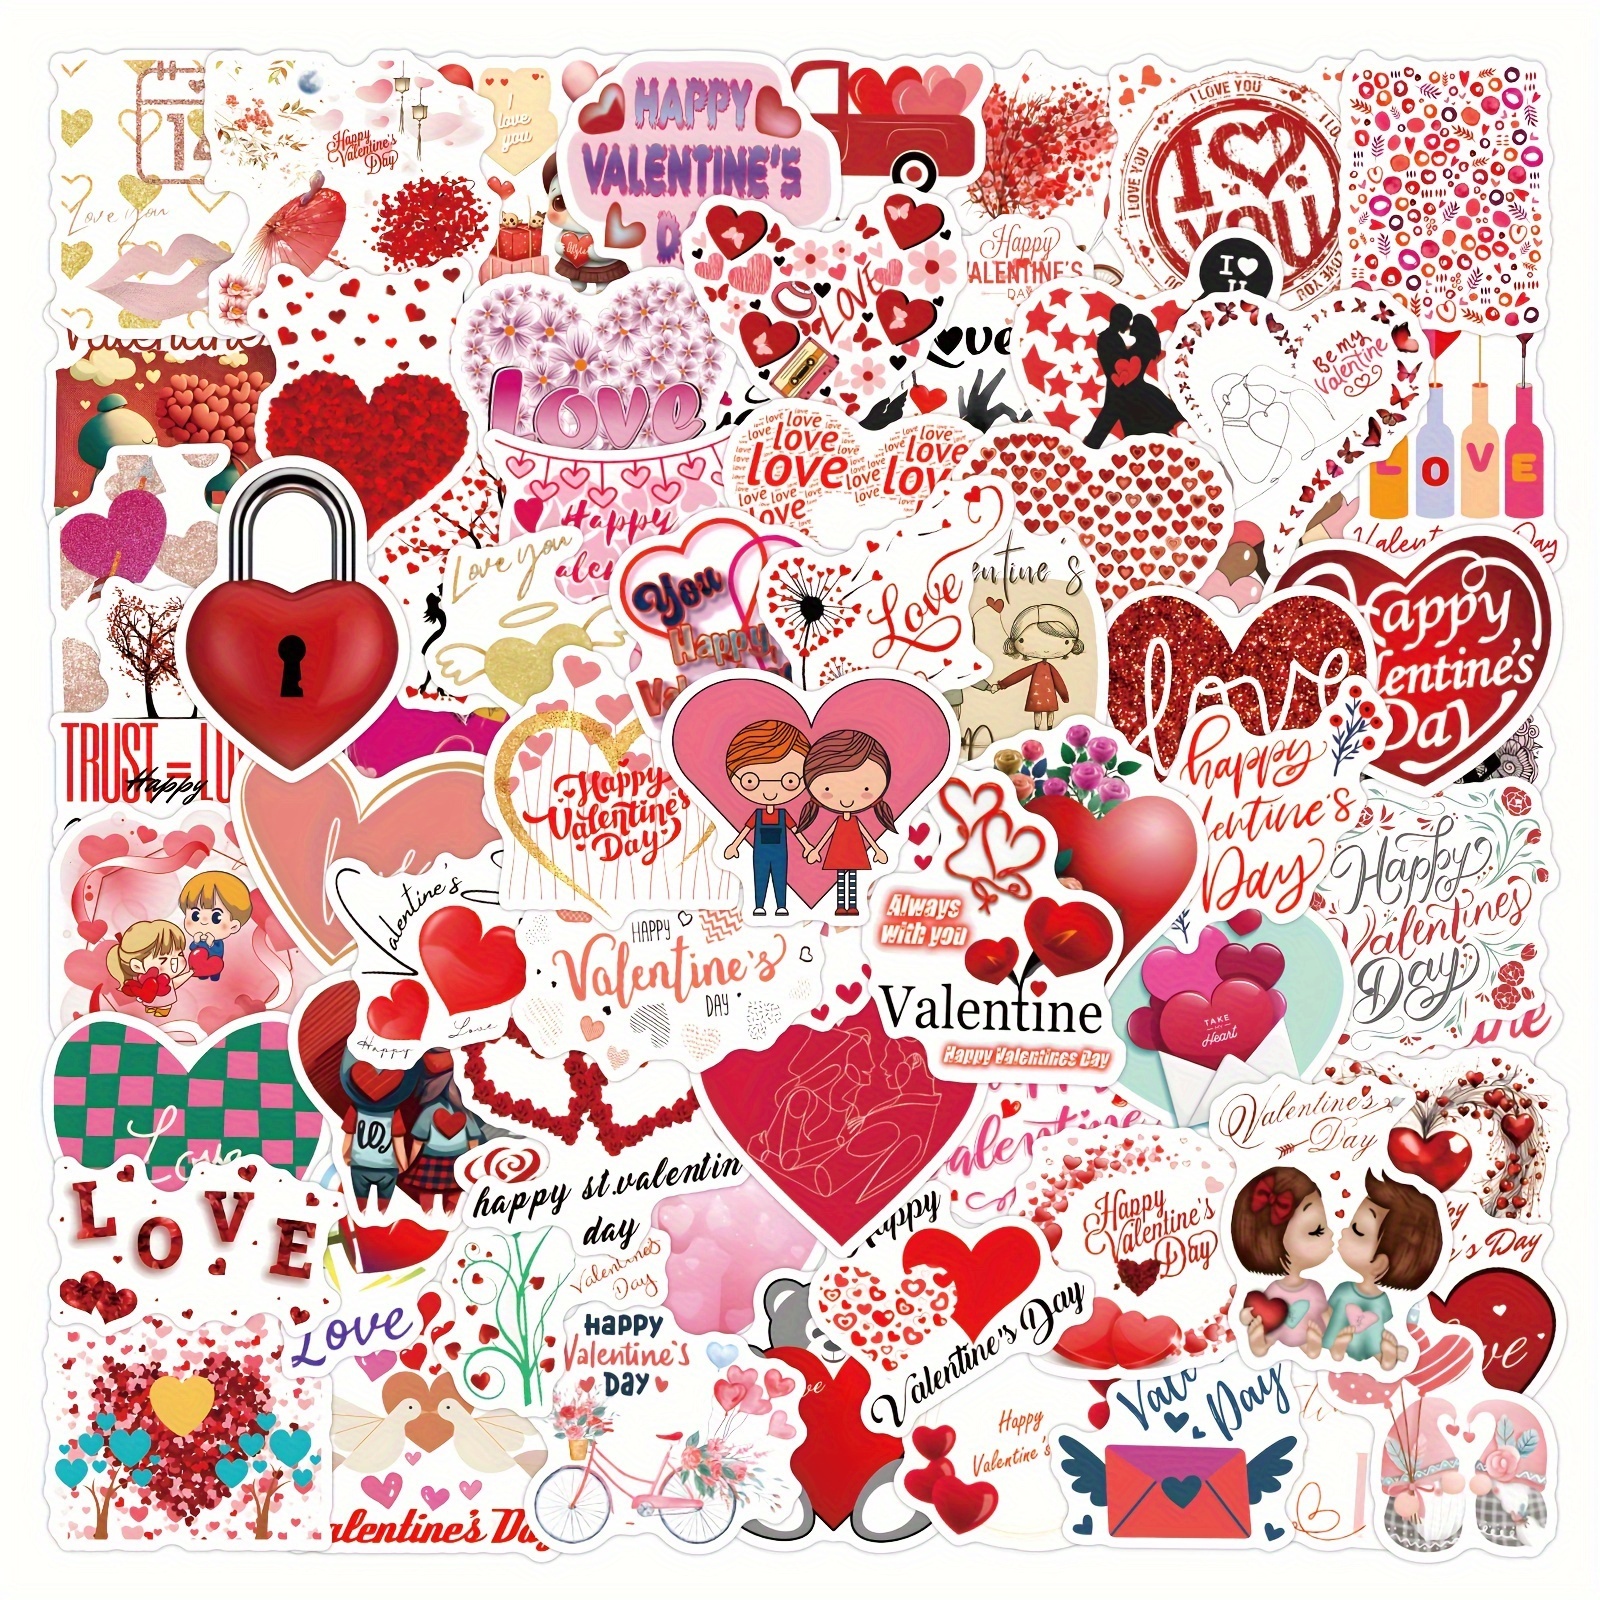 122pcs Love Stickers, Vinyl Waterproof Valentines Stickers For Laptop,Water  Bottle, Envelopes, Crafts Scrapbooking, I Love You Decorations,Stickers Fo